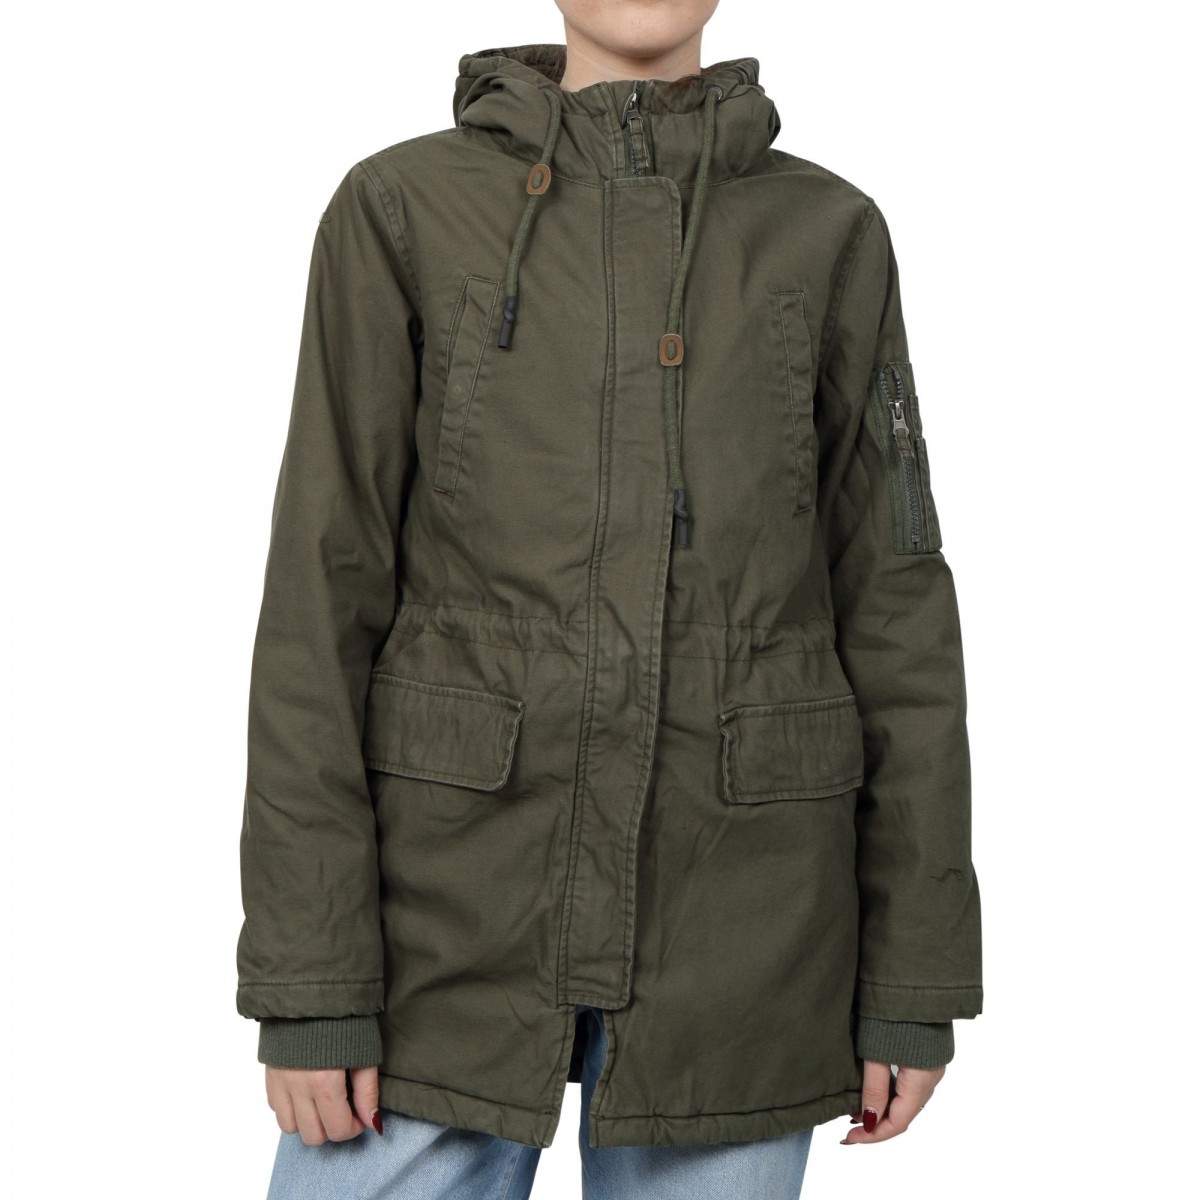 BASEHIT WOMENS LONG WASHED JKT WITH HOOD